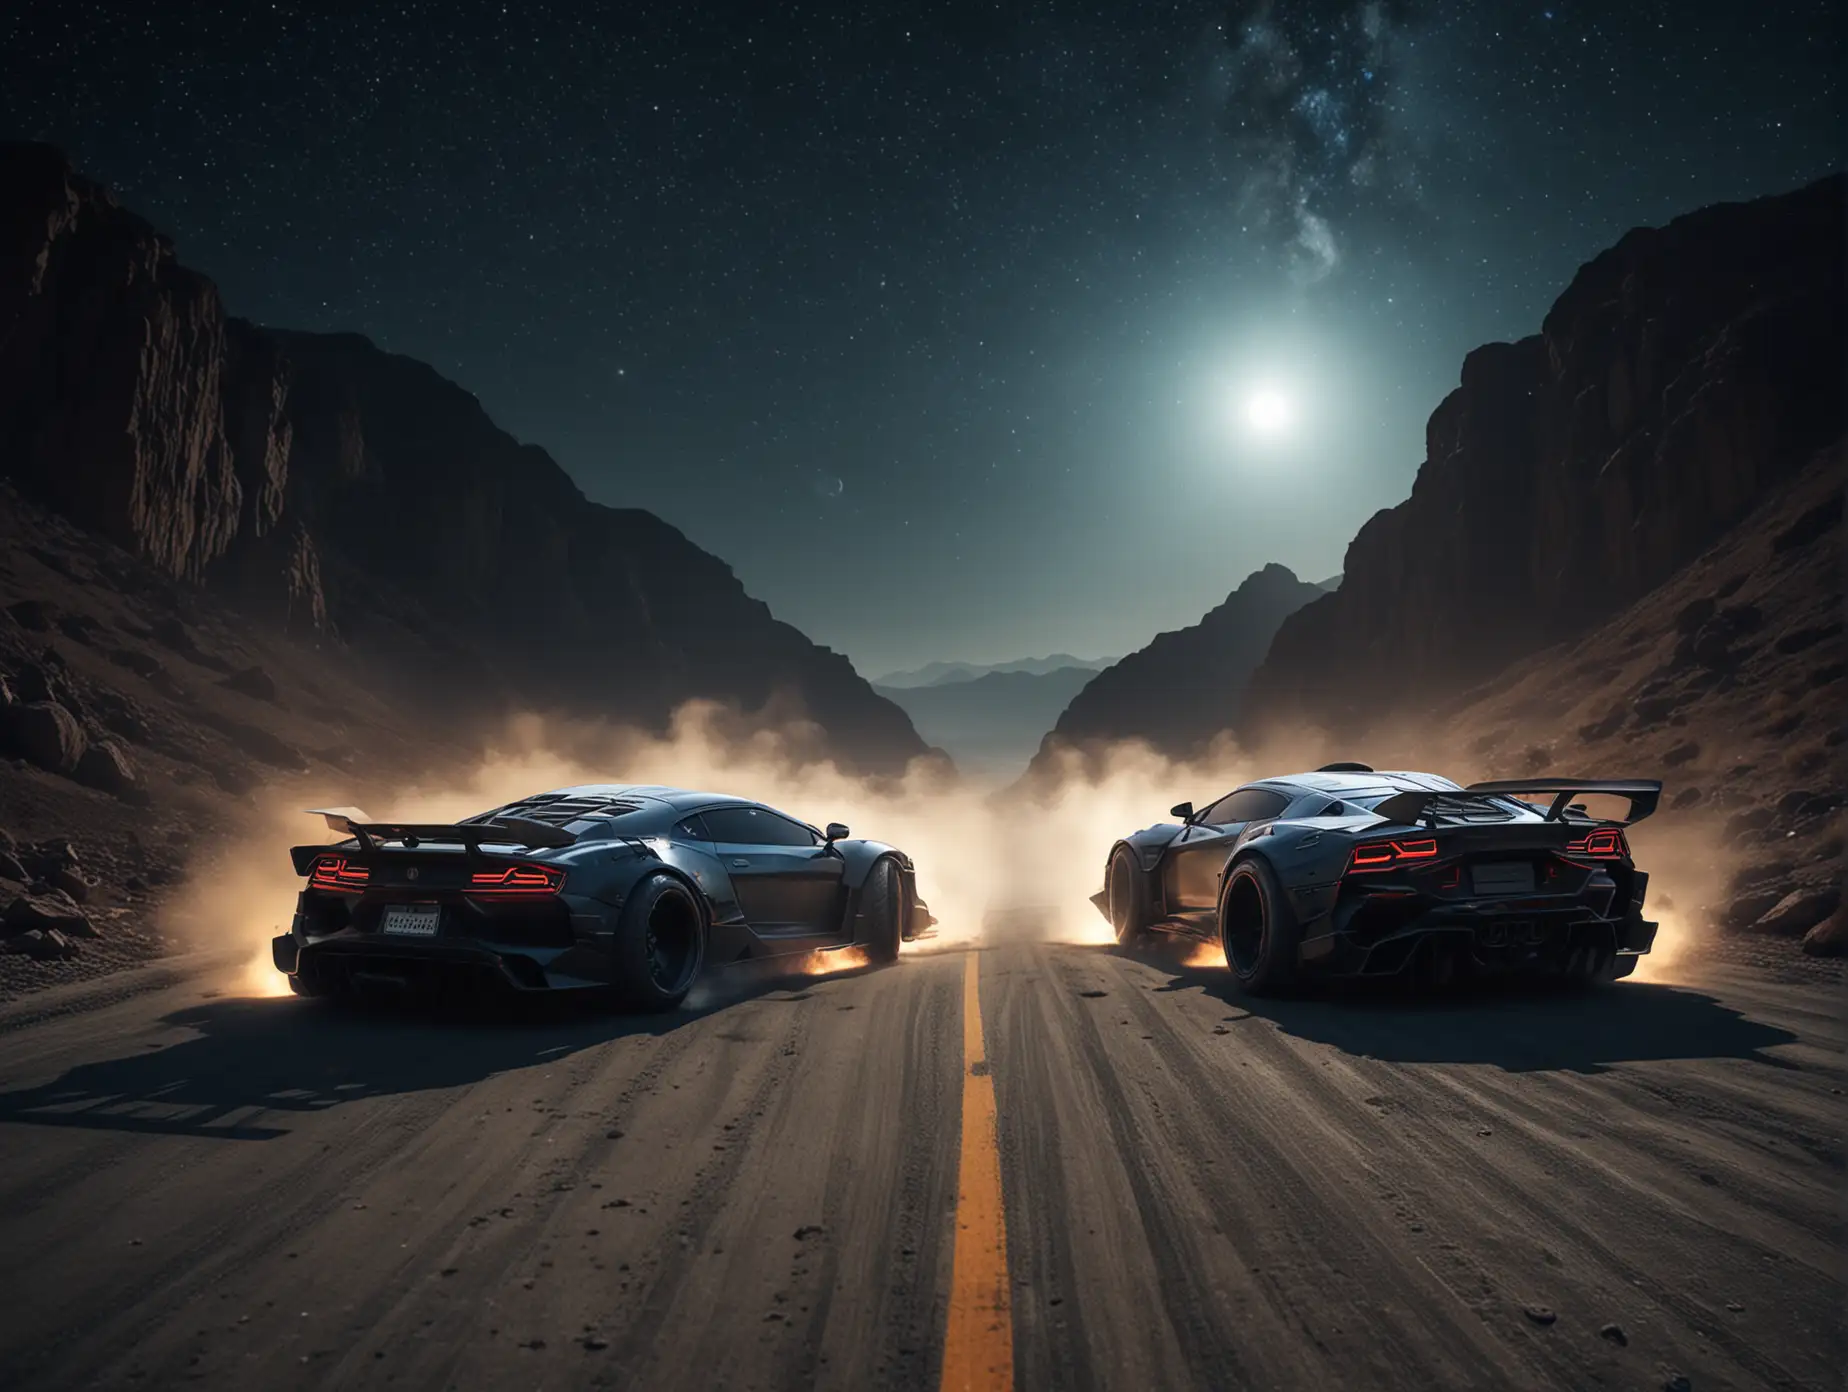 Create futuristic turning drifting cars from tiger and lion, view from rear, drifting in biggest planet in universe I want to see planet Earth in the background, car lights dark indigo, lighting car color black, drifting on downhill on Greece 